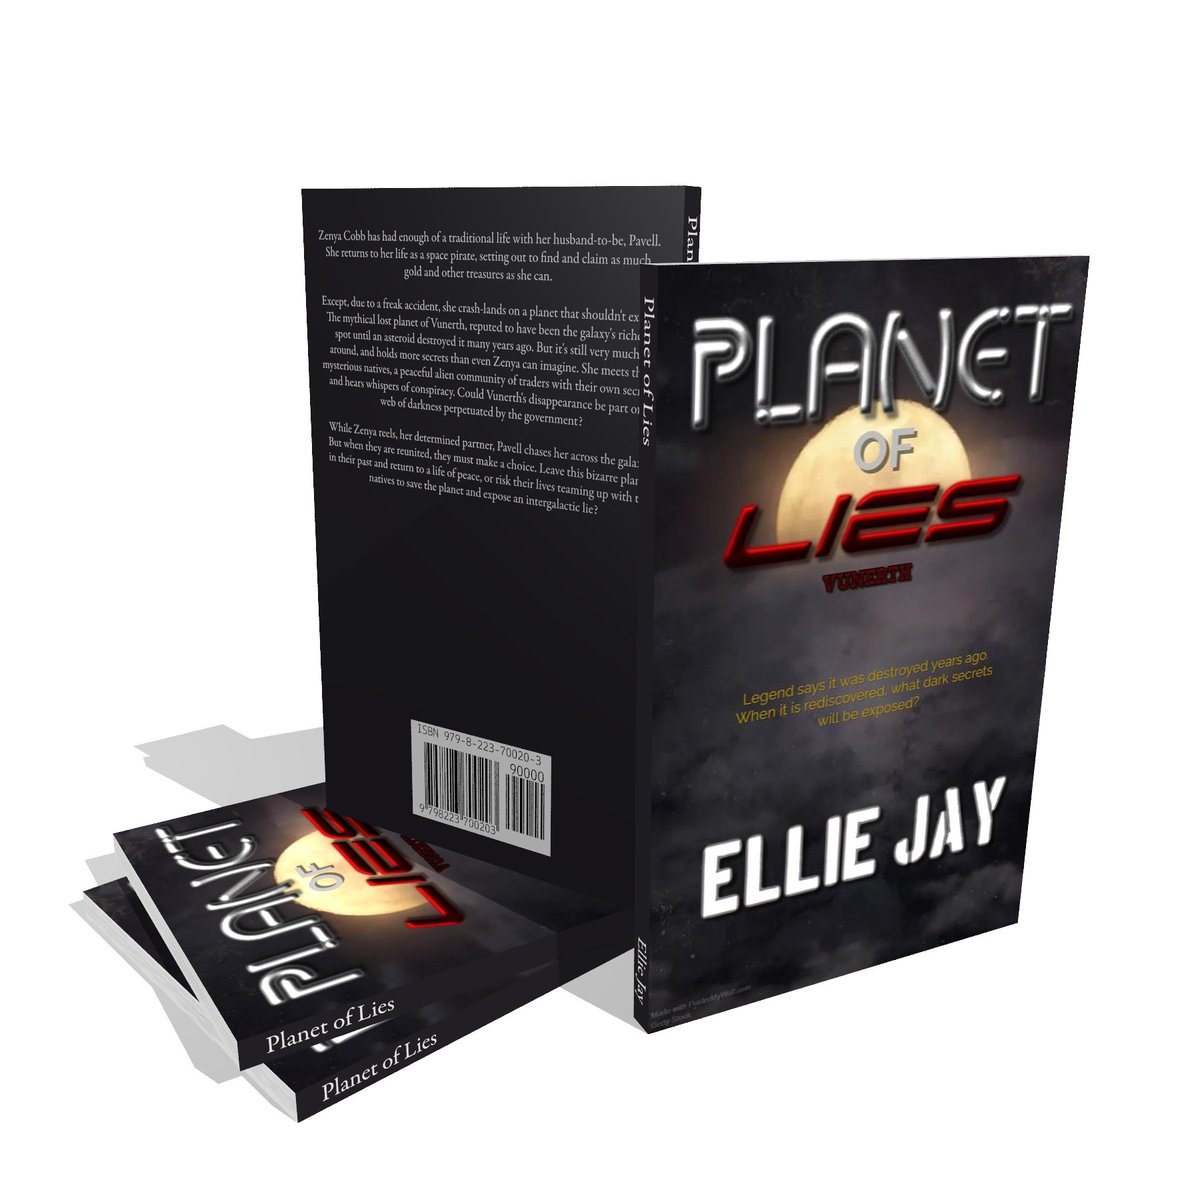 Planet Of Lies is a #scifi adventure story following an aggrieved space pirate, her on-and-off fiancé and alien vigilantes who want to take down the government. books2read.com/PlanetOfLies The dialogue is witty, the narration is sarcastic, and the pace is breakneck.